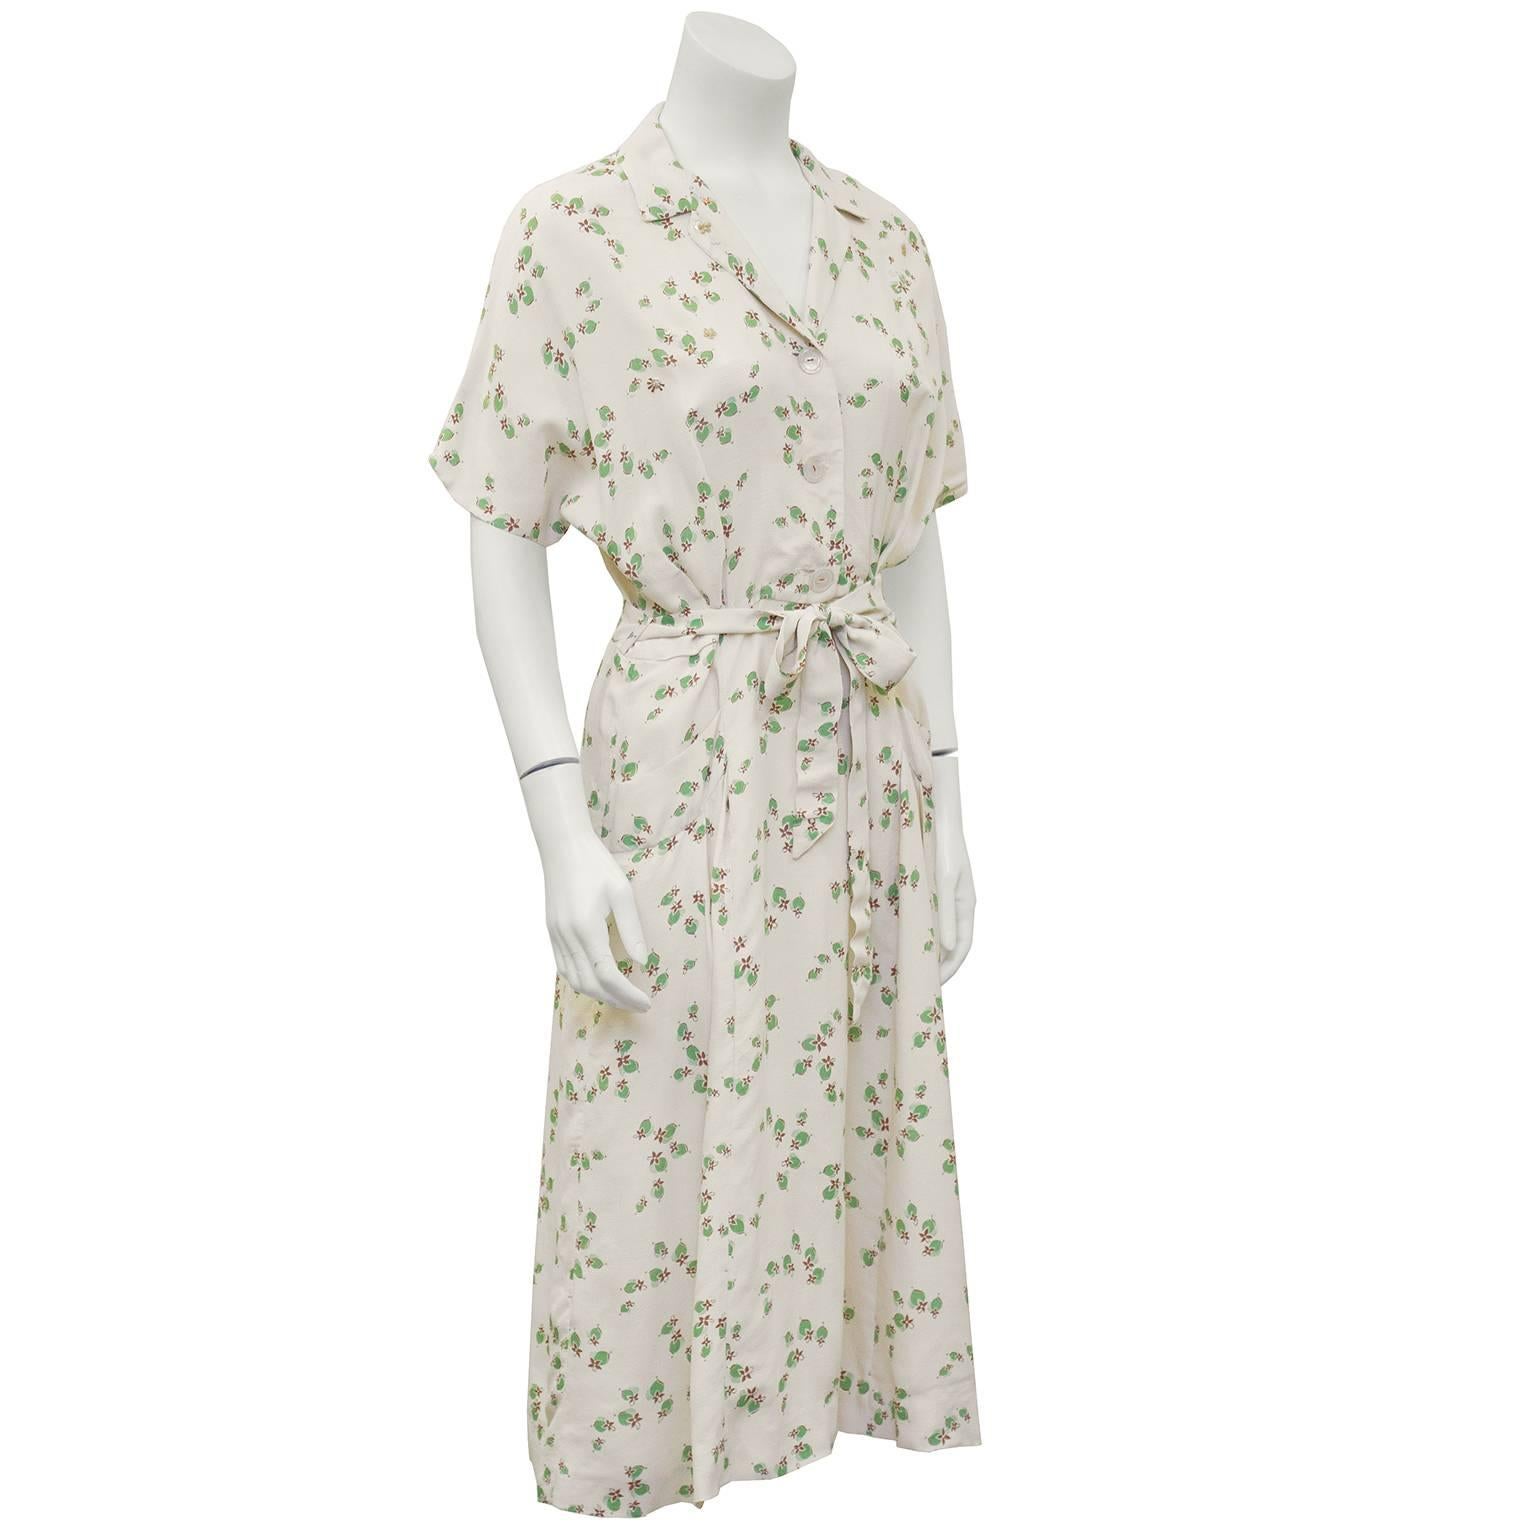 Beige rayon shirtwaist dress from the 1940's. The dress has an all over delicate print of green flowers with sequin and bead embellishments interspersed throughout. Buttons down the front and tie belt at the waist. Slight dolman style sleeve. In